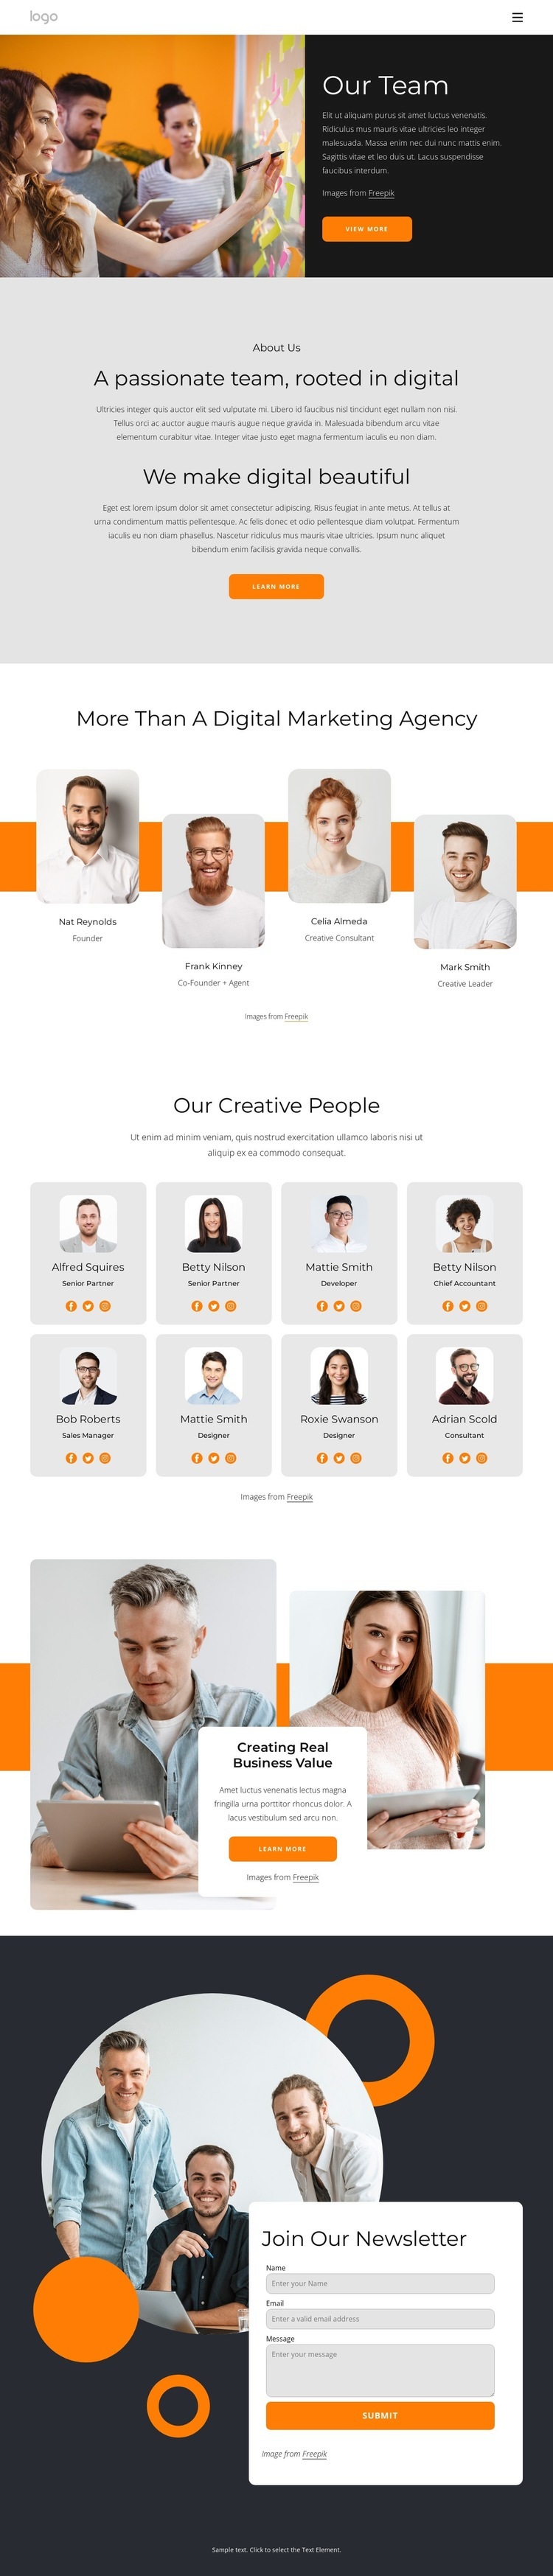 We are creative people with big dreams Wix Template Alternative